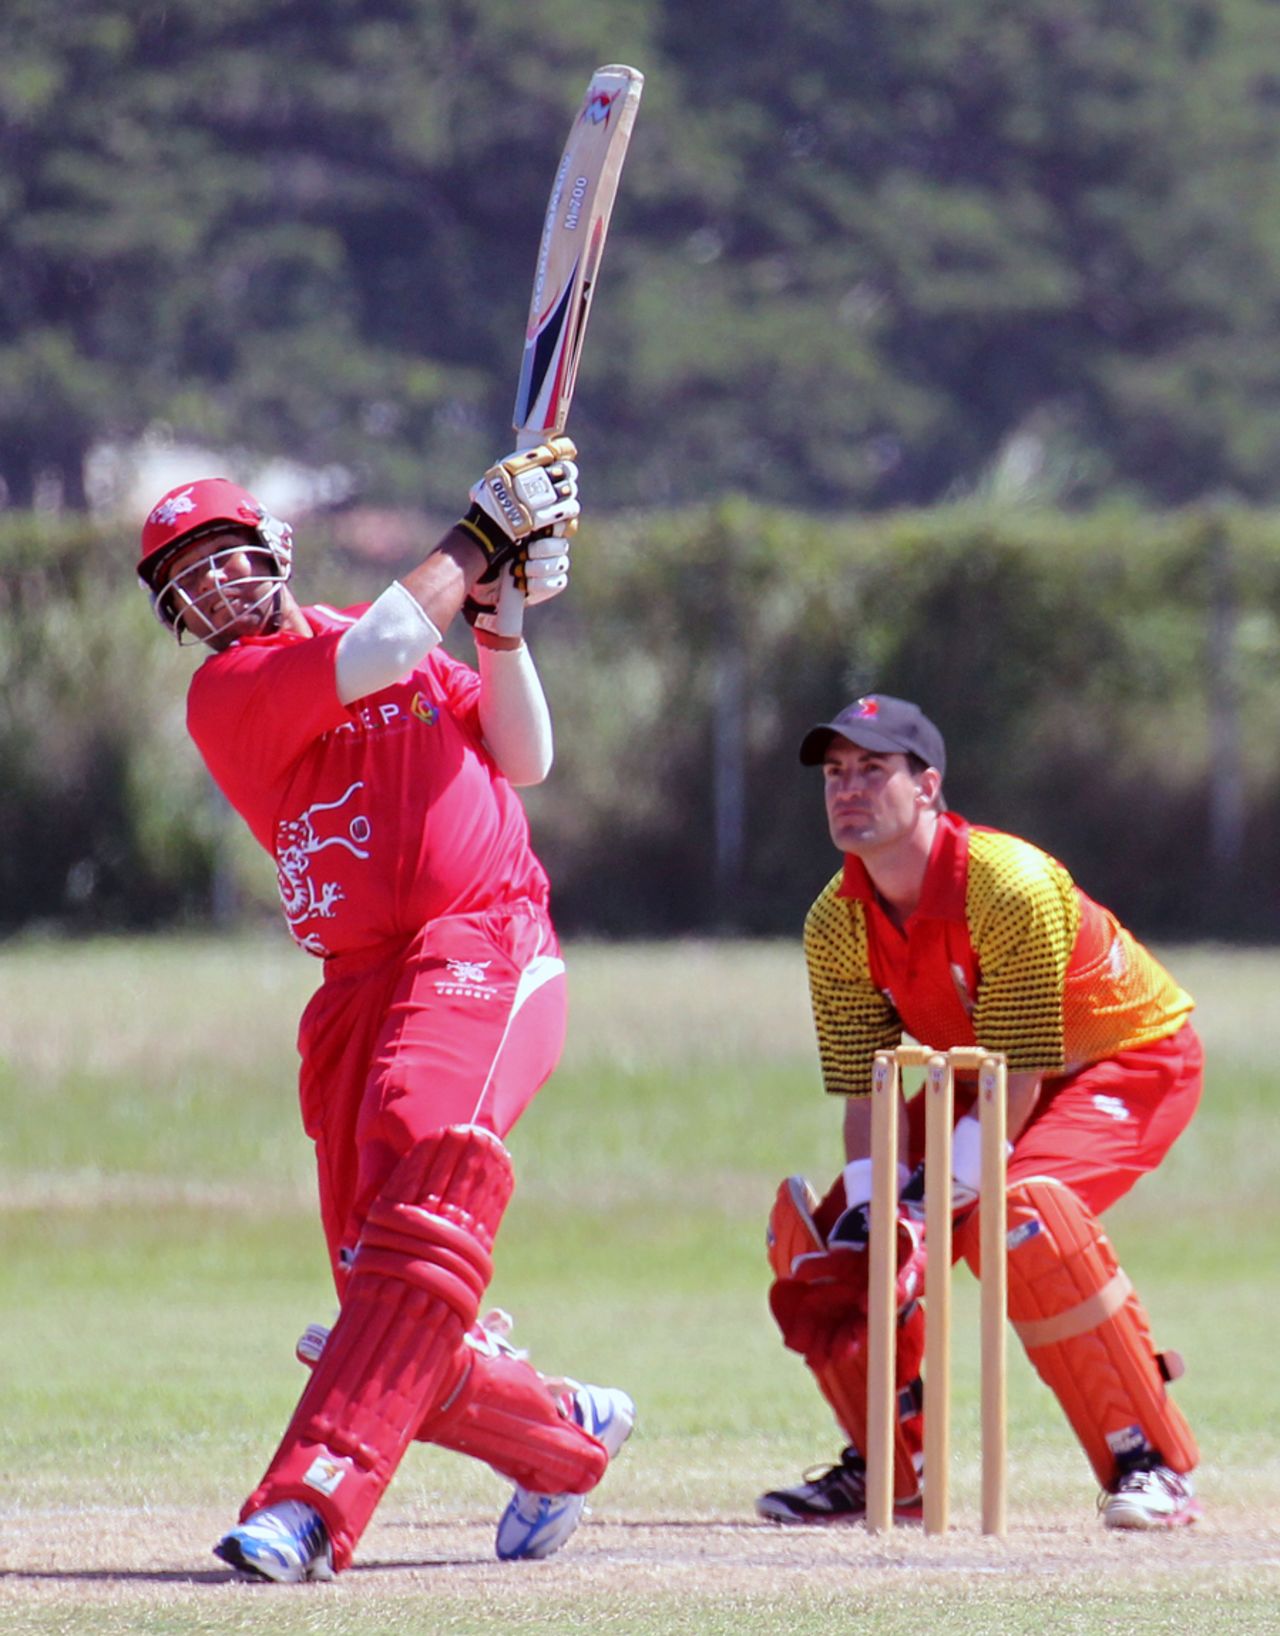 Babar Hayat top scored with 67* against Brisbane/Gold Coast at the Air Niugini Super Series 2012 T20 played in Port Moresby 